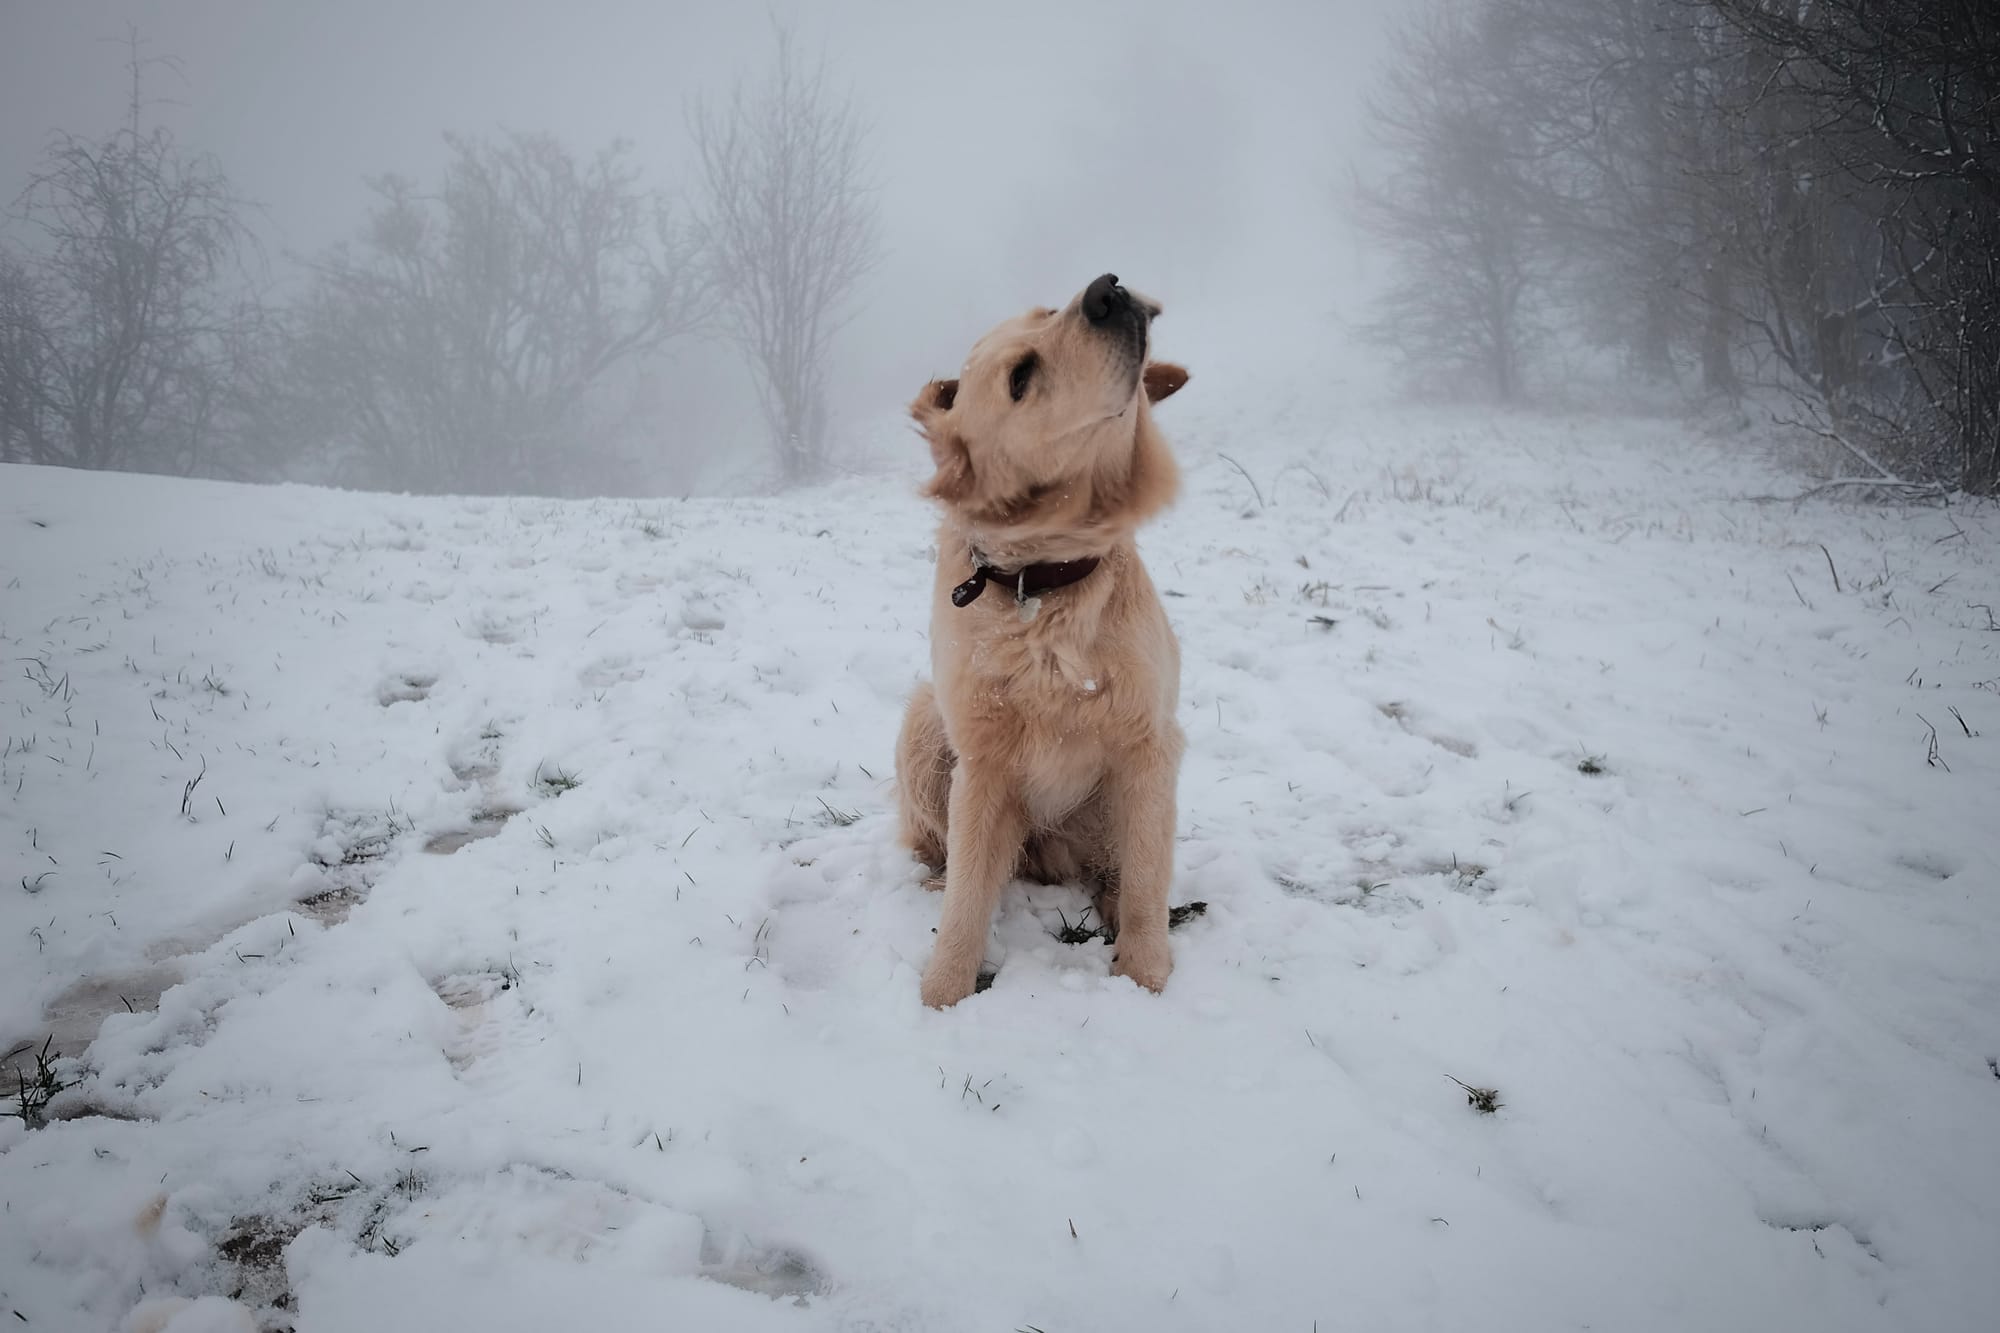 A Golden Retriever dog shakes itself in the snow, silhouettes of trees just visible through the low cloud.